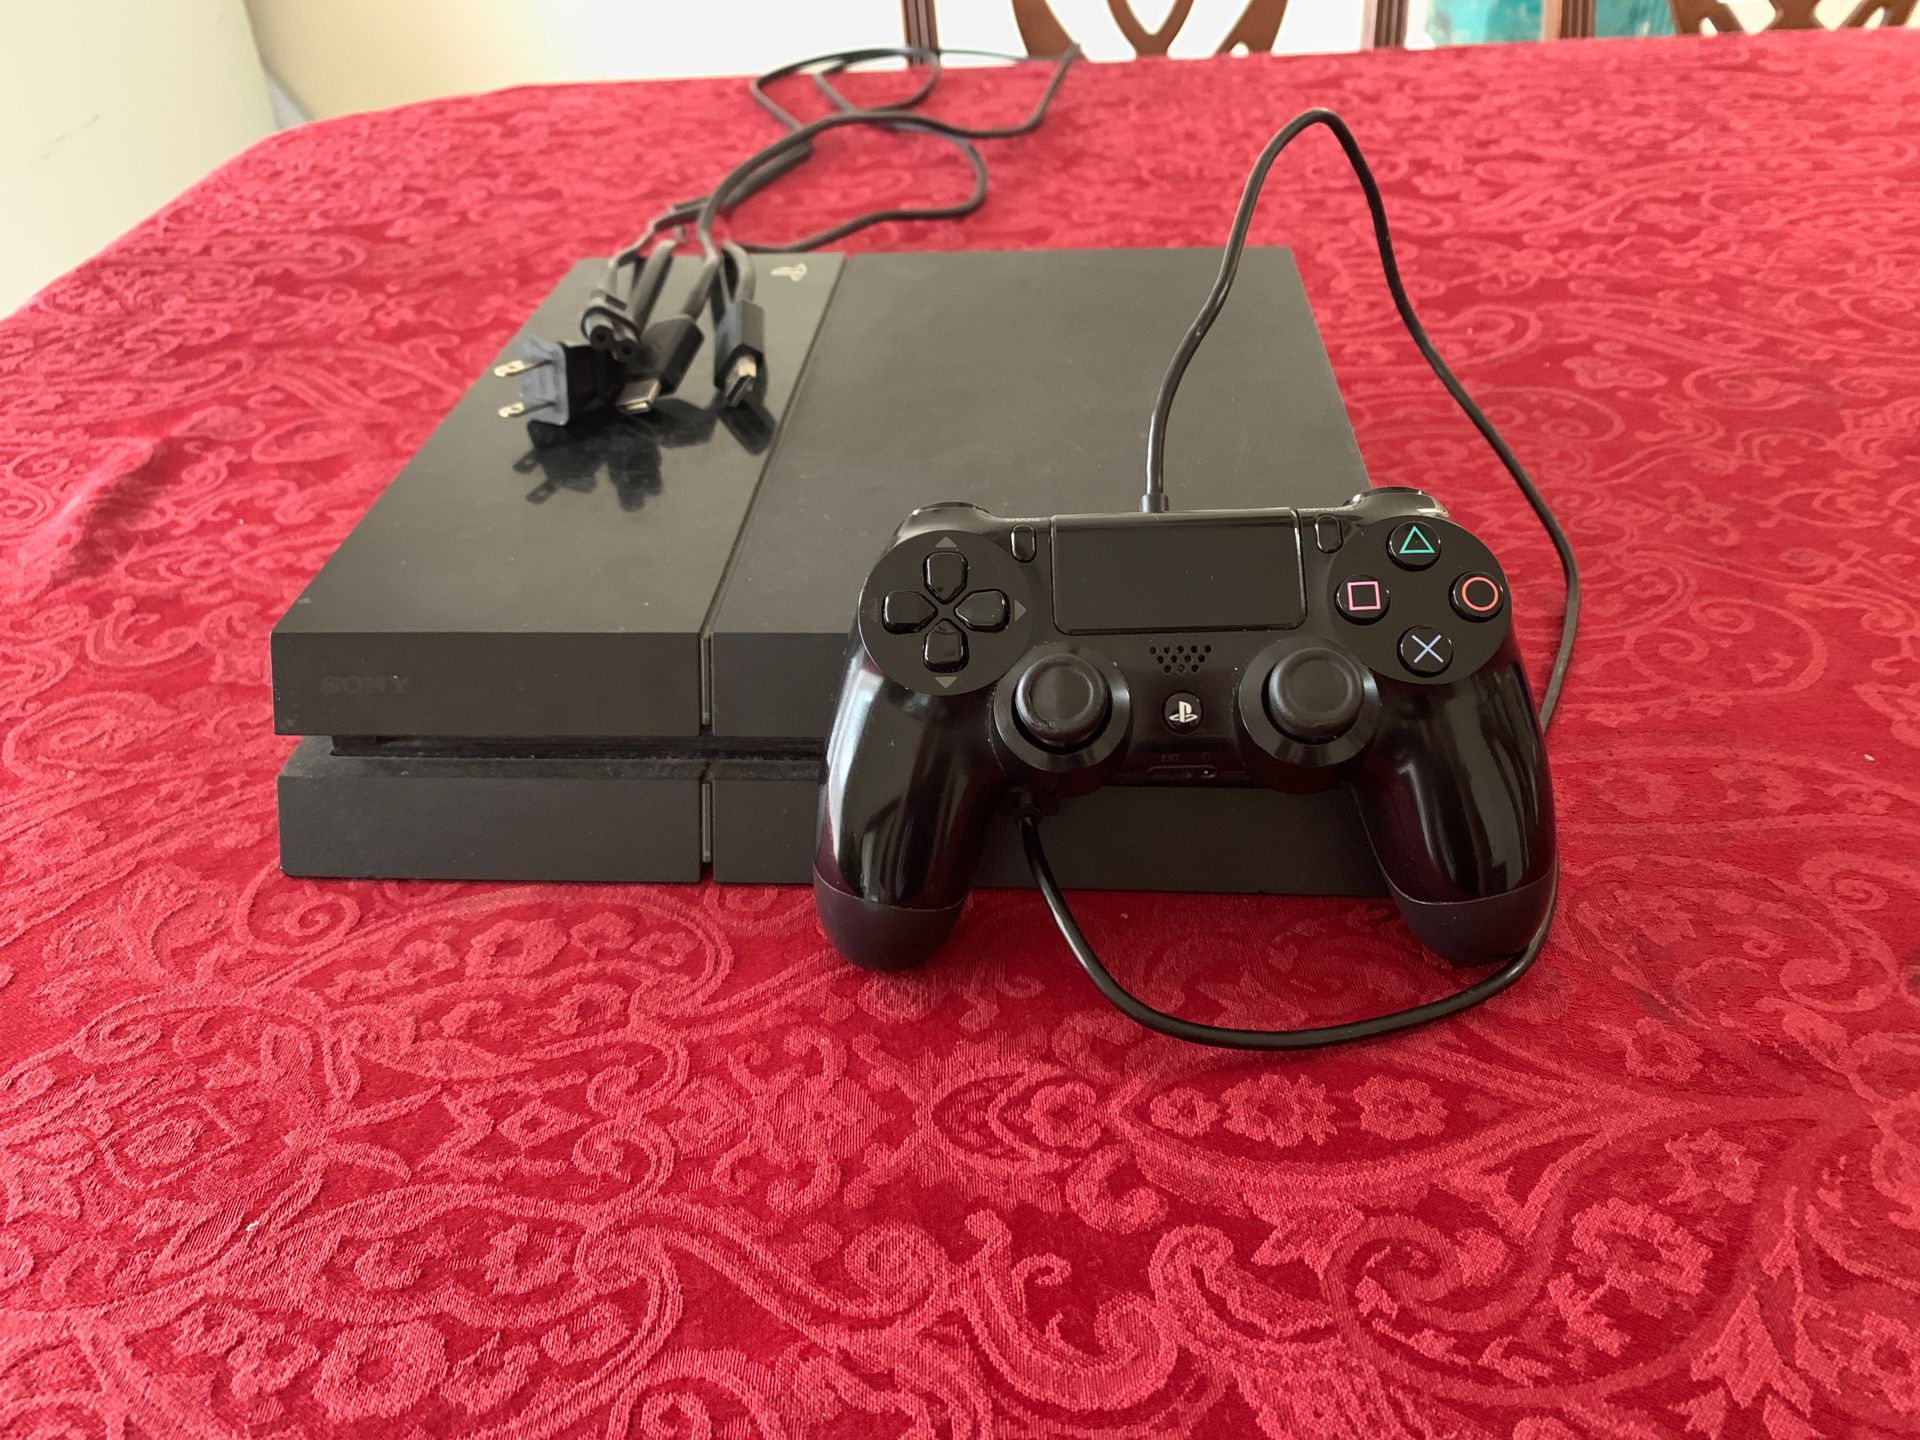 PS4 500 GB Console with HDMI, Power Cord, Charger, and Controller